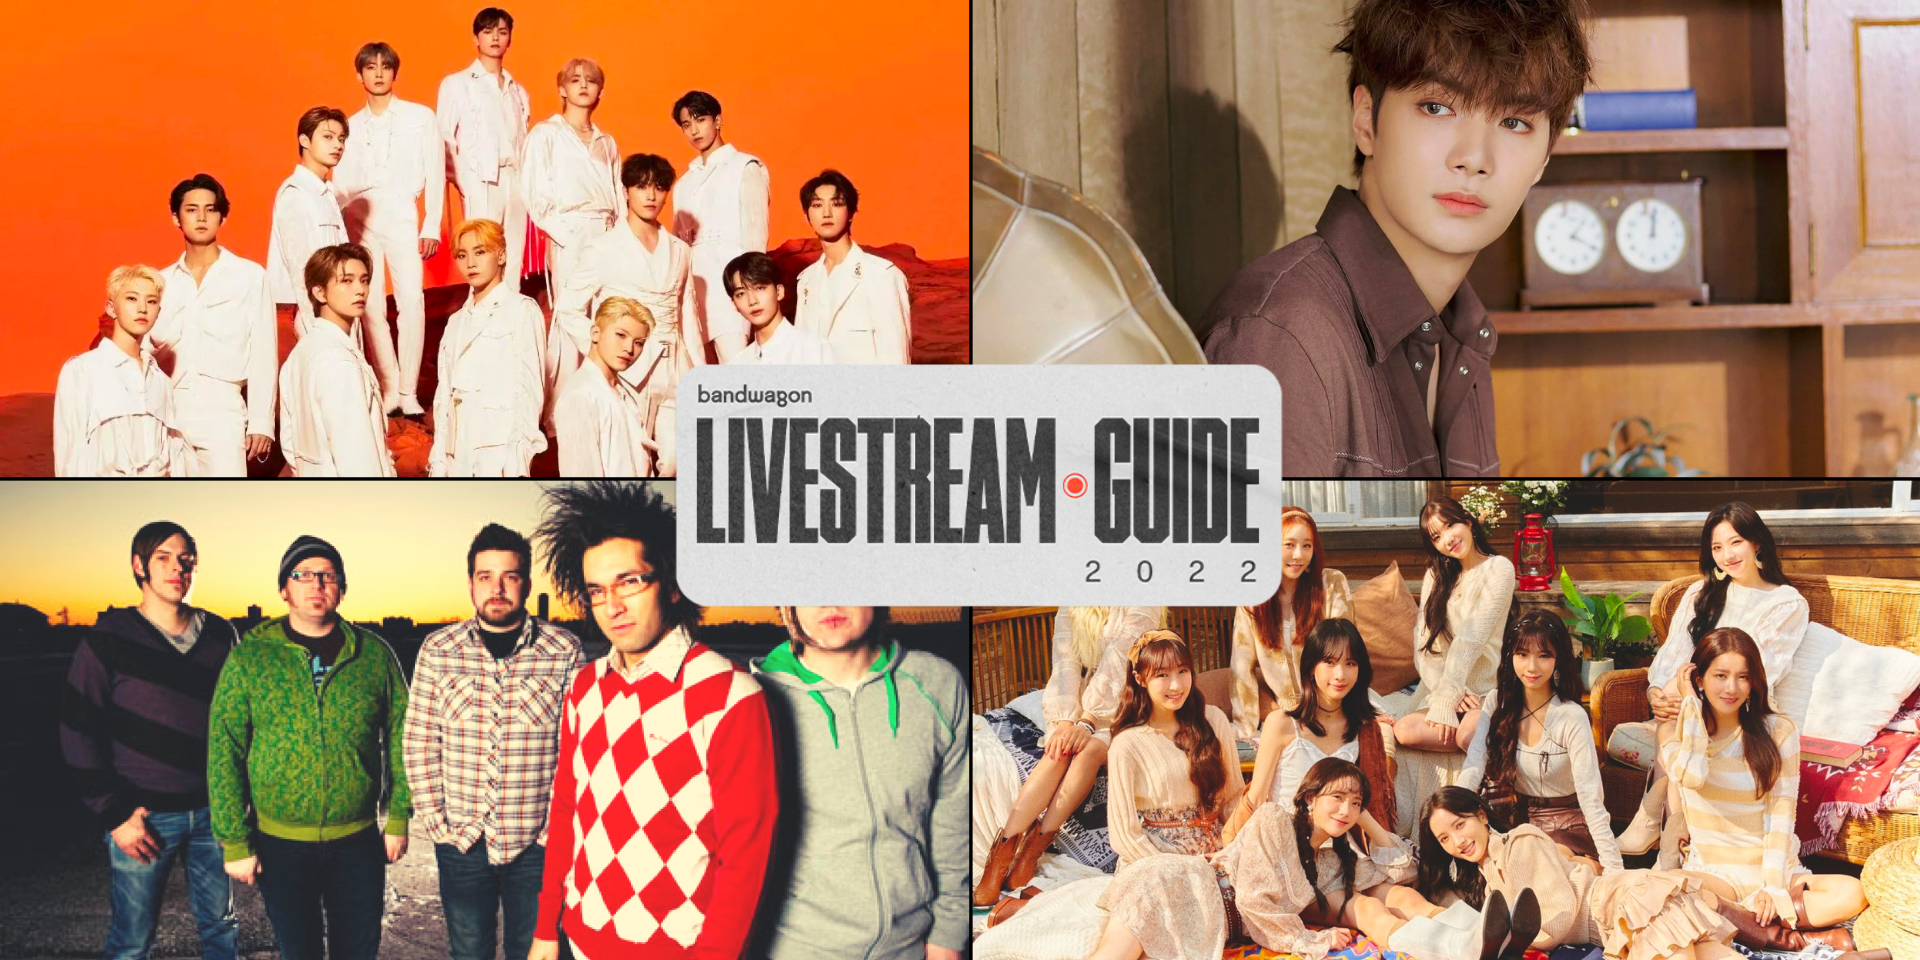 Online concerts and festivals to stream in 2022 - SEVENTEEN, WJSN, Kim Jonghyeon, Motion City Soundtrack, and more